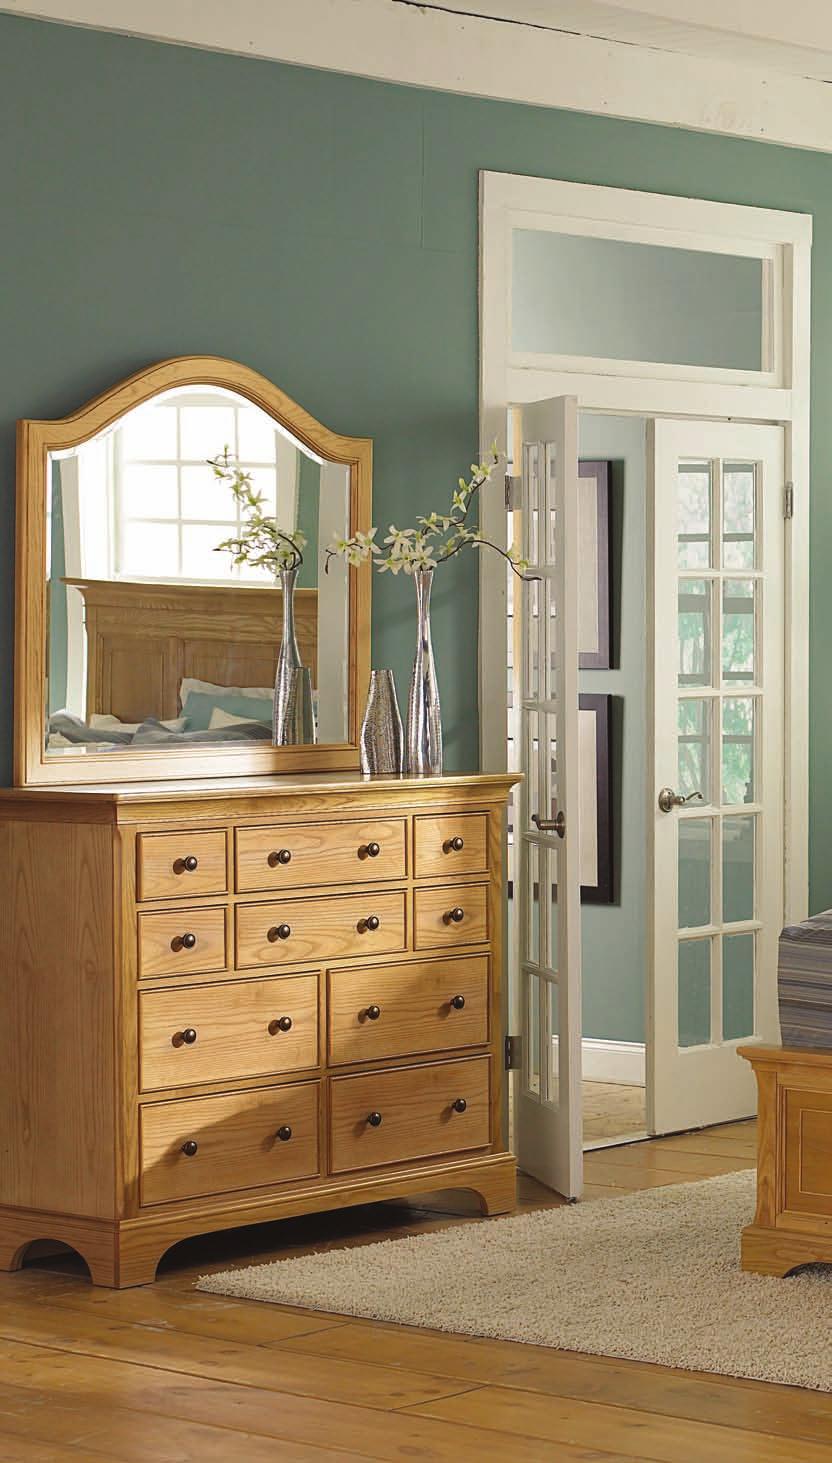 901-040C LANDSCAPE MIRROR - NATURAL W44 D2 H40 Beveled mirror. 901-220C DRESSING CHEST/ENTERTAINMENT - NATURAL W52 D18 H43 10 drawers, top middle drawer has drop down front.